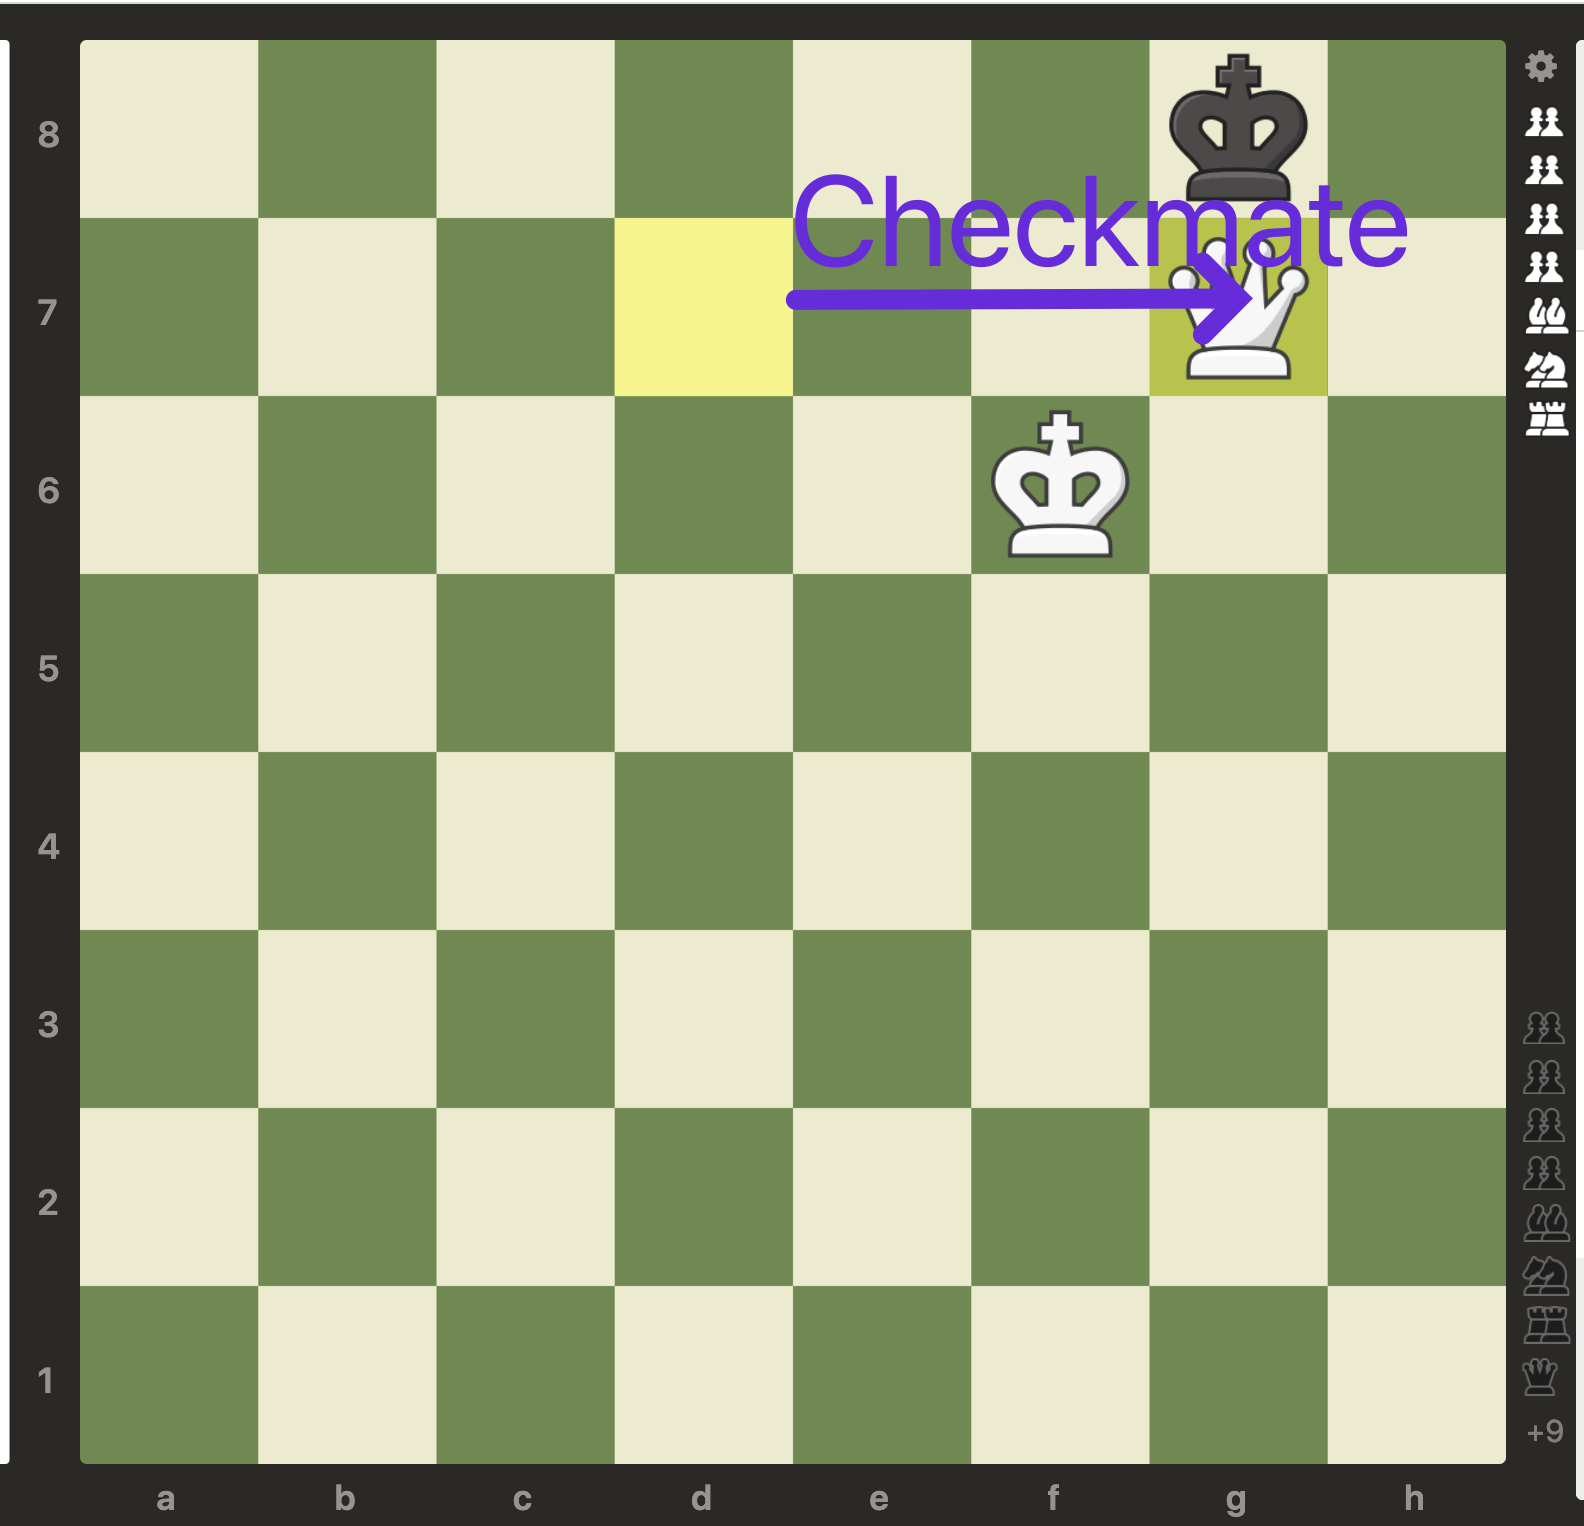 7.-Checkmate